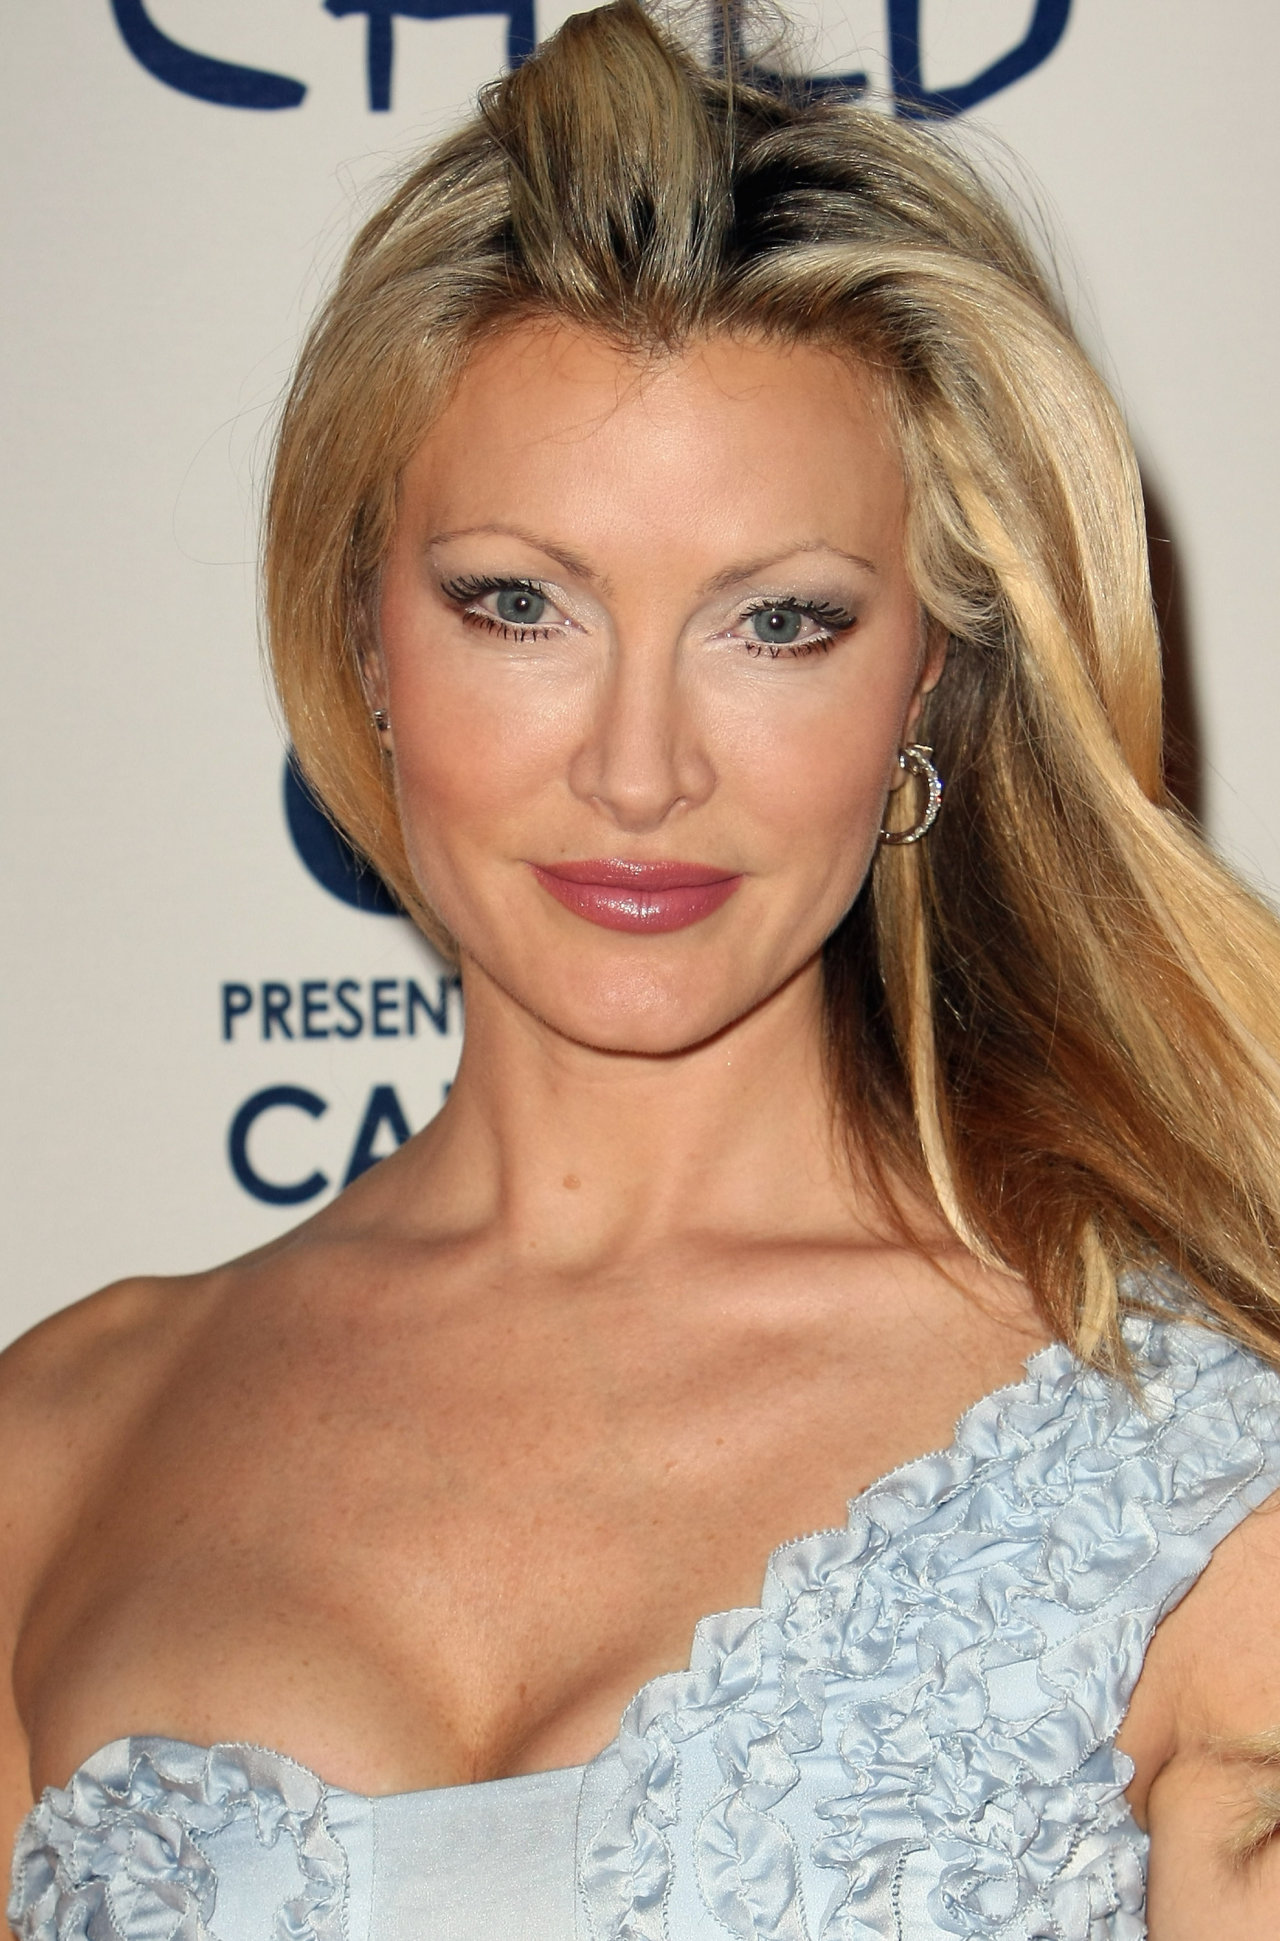 Caprice Bourret leaked wallpapers